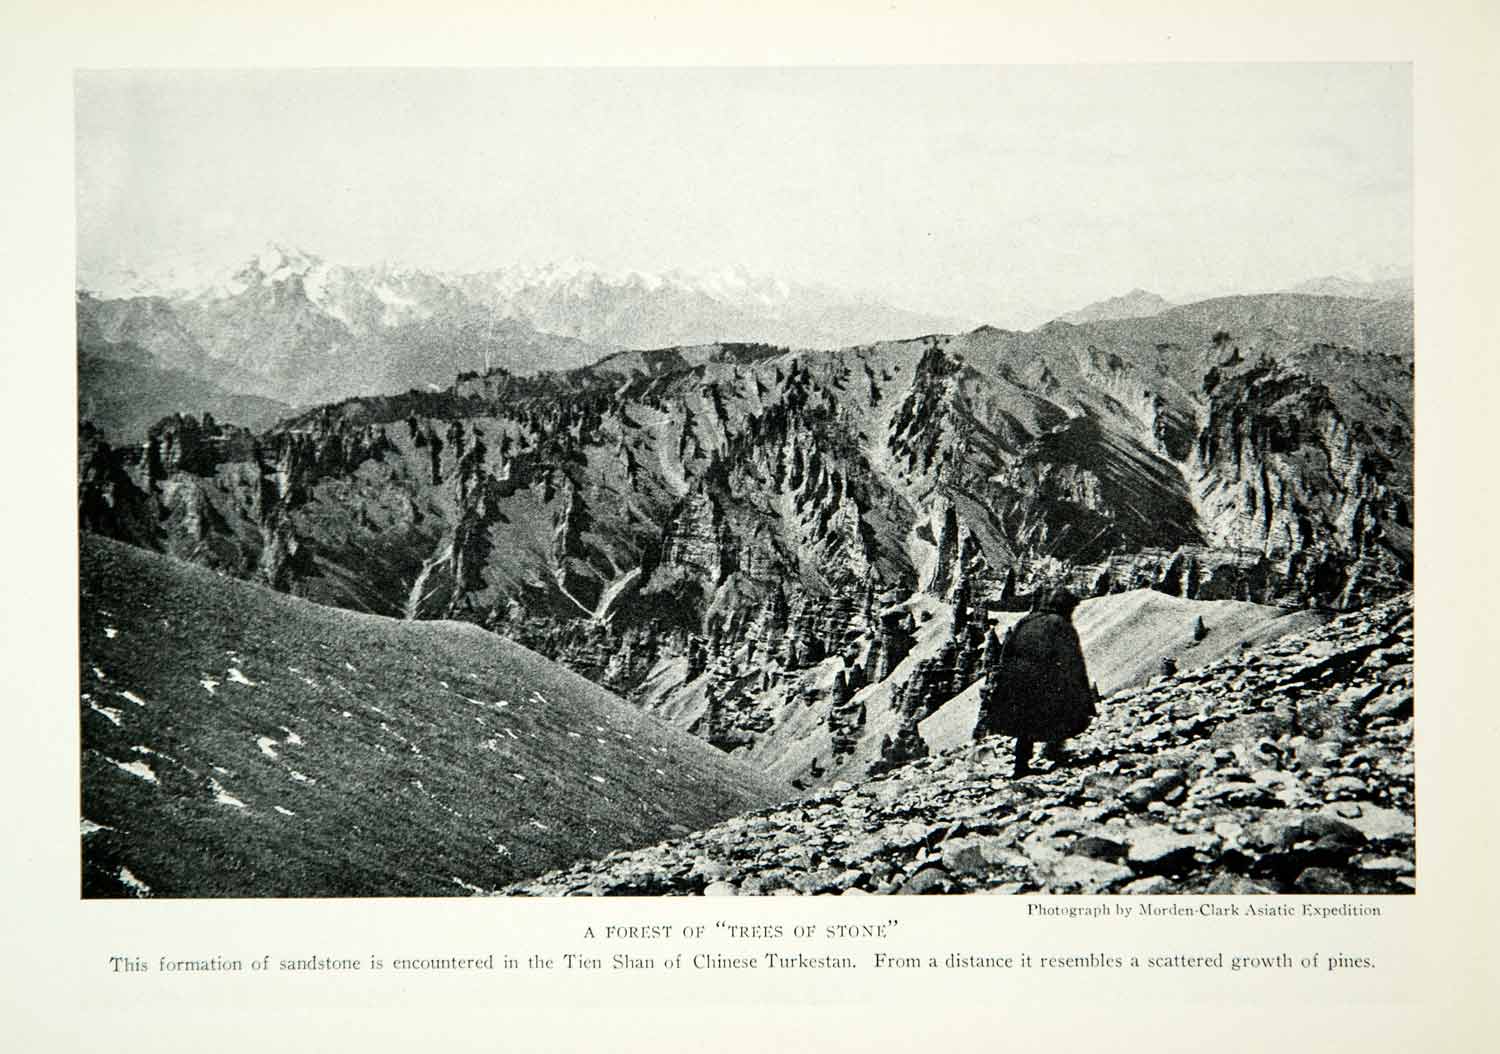 1928 Print Tien Shan Mountains Chinese Turkistan Trees of Stone Landscape NGMA2